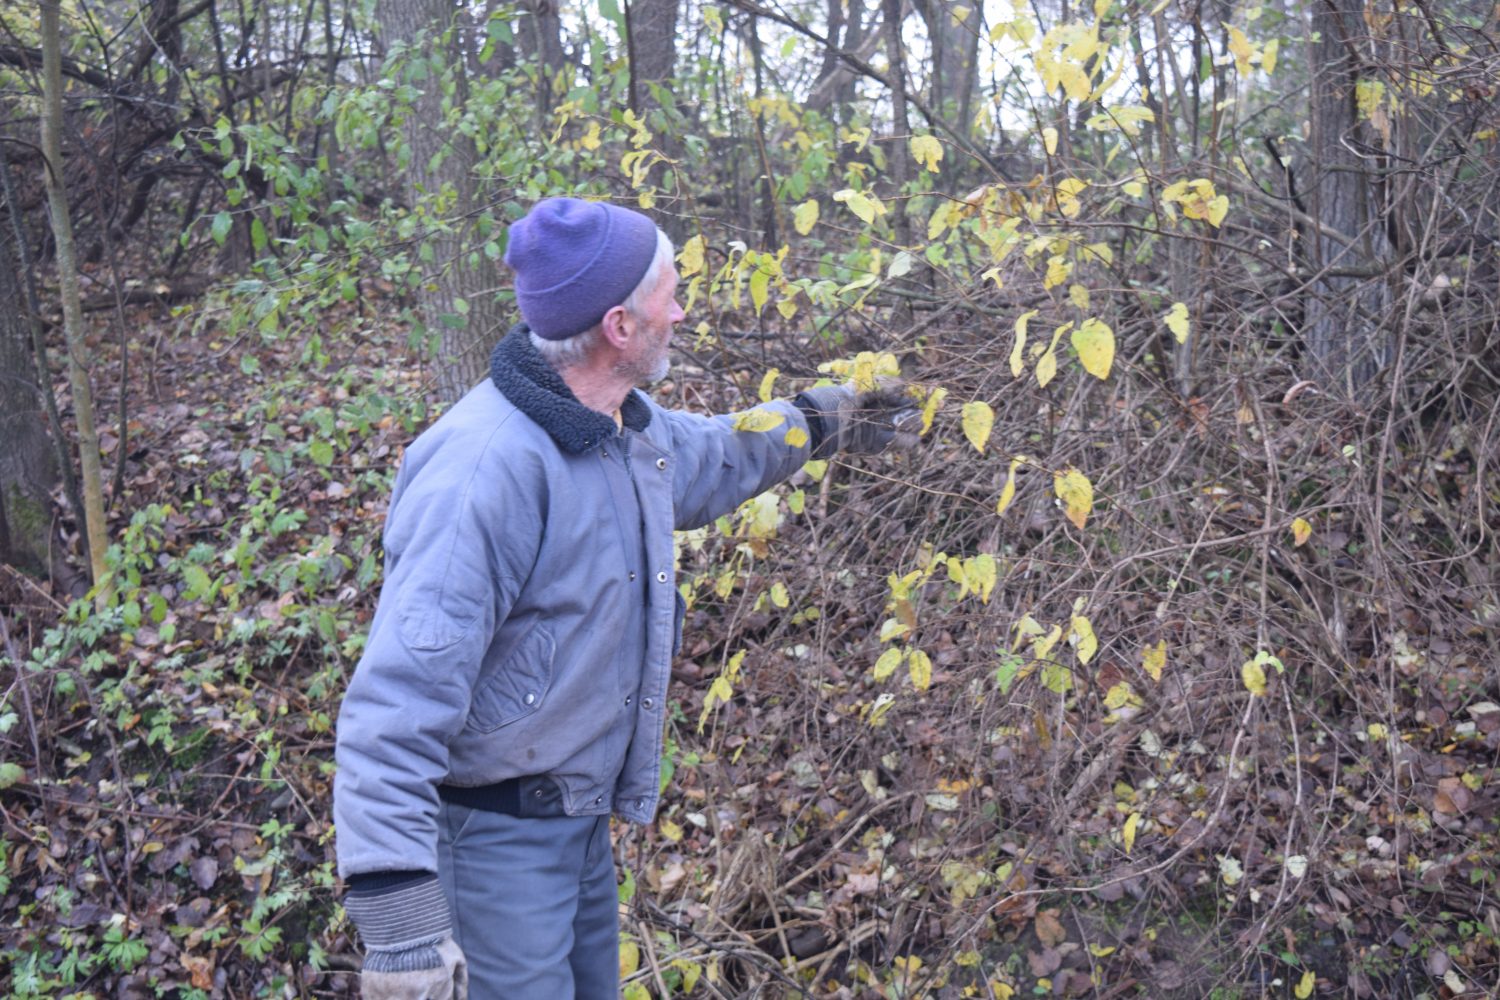 Dan Umhoefer describes the foliage that is considered invasive species and what is native to the landscape.